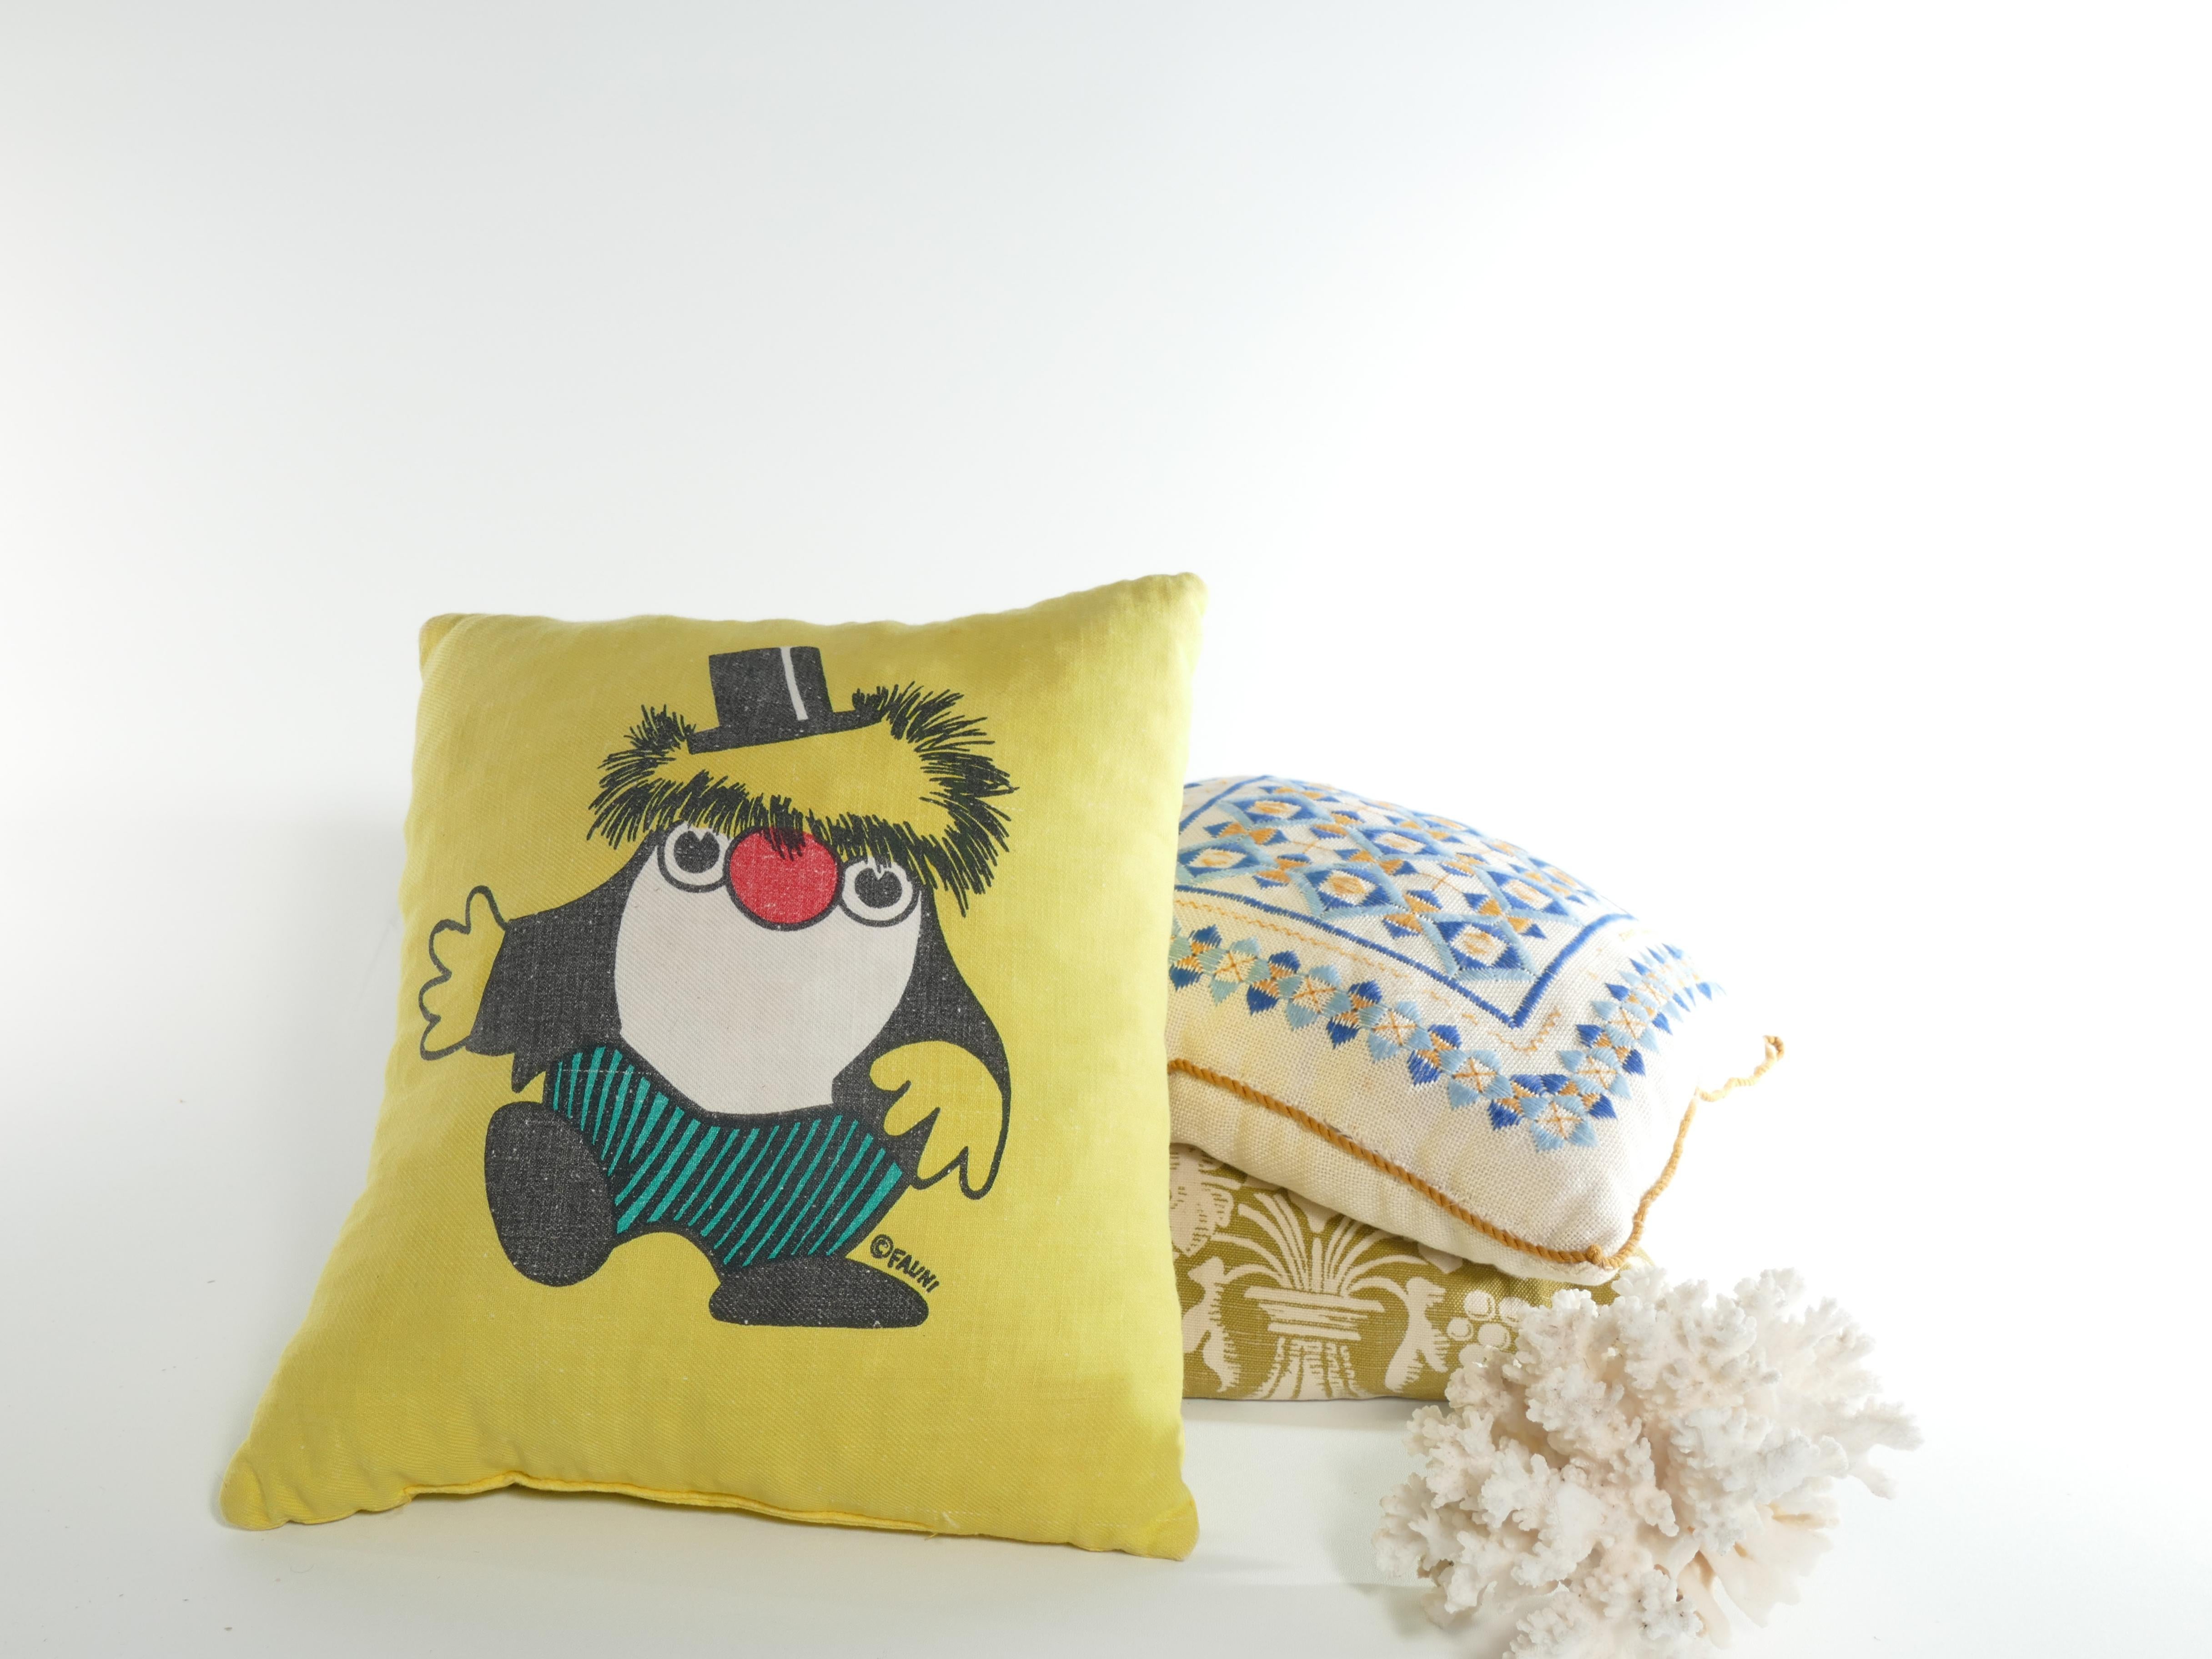 1970’s Atelier Fauni Yellow  Pillow Depicting Mr Edward the Business Troll  For Sale 5